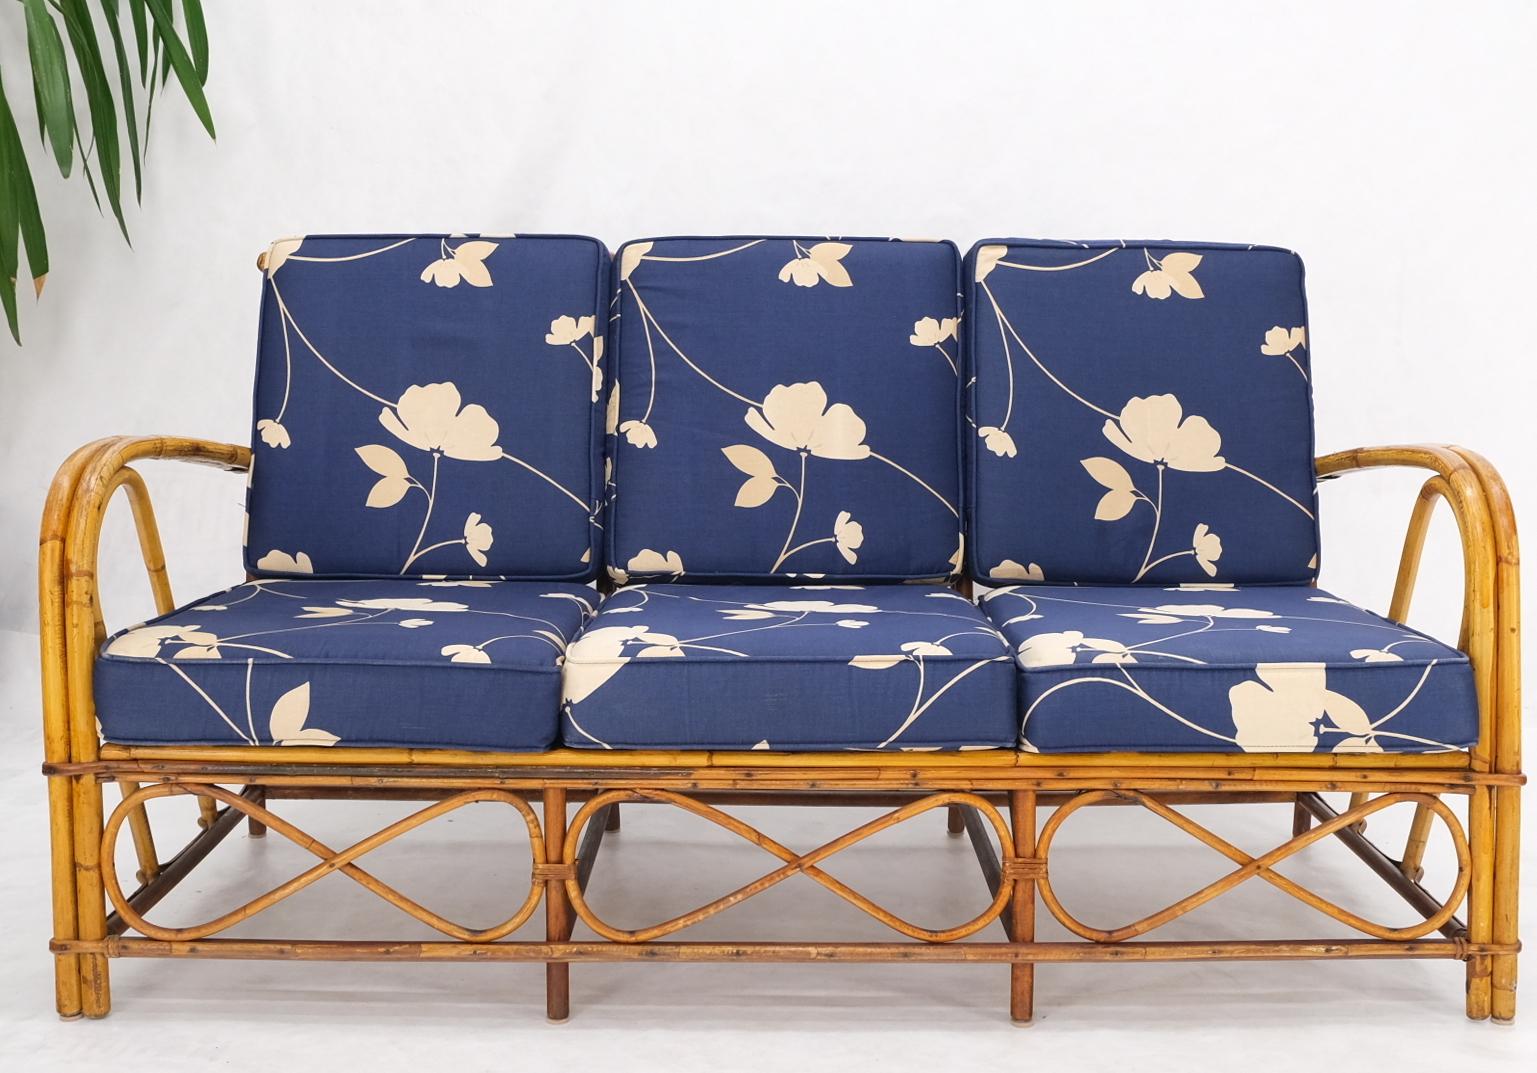 20th Century Split Reed Wicker Rattan Bamboo 3 Seater Sofa Blue & White Cushions For Sale